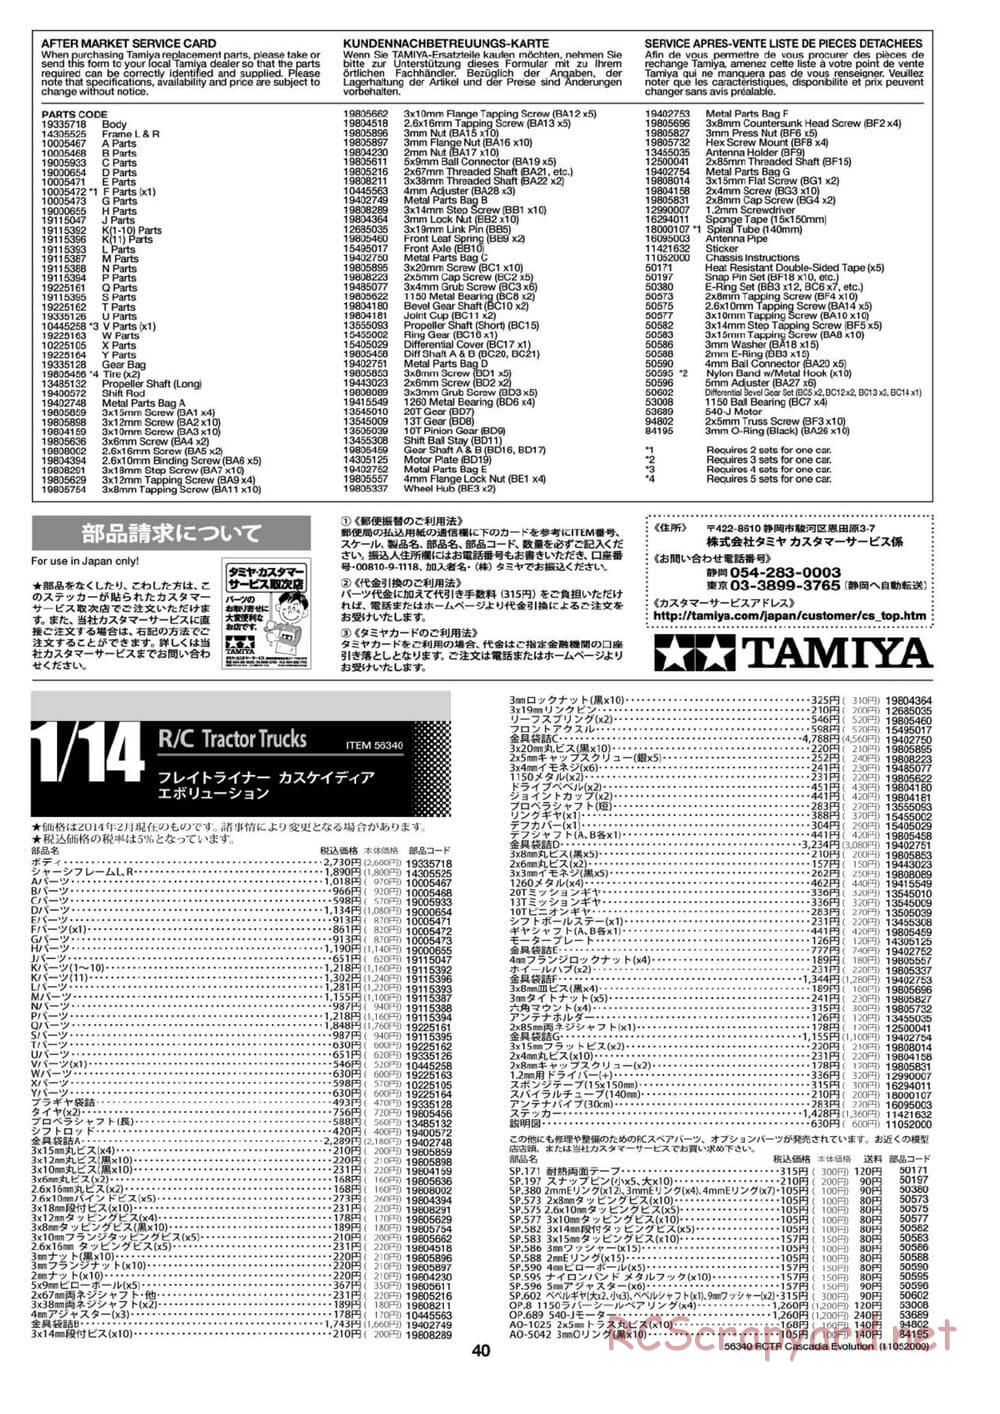 Tamiya - Freightliner Cascadia Evolution Tractor Truck Chassis - Manual - Page 40